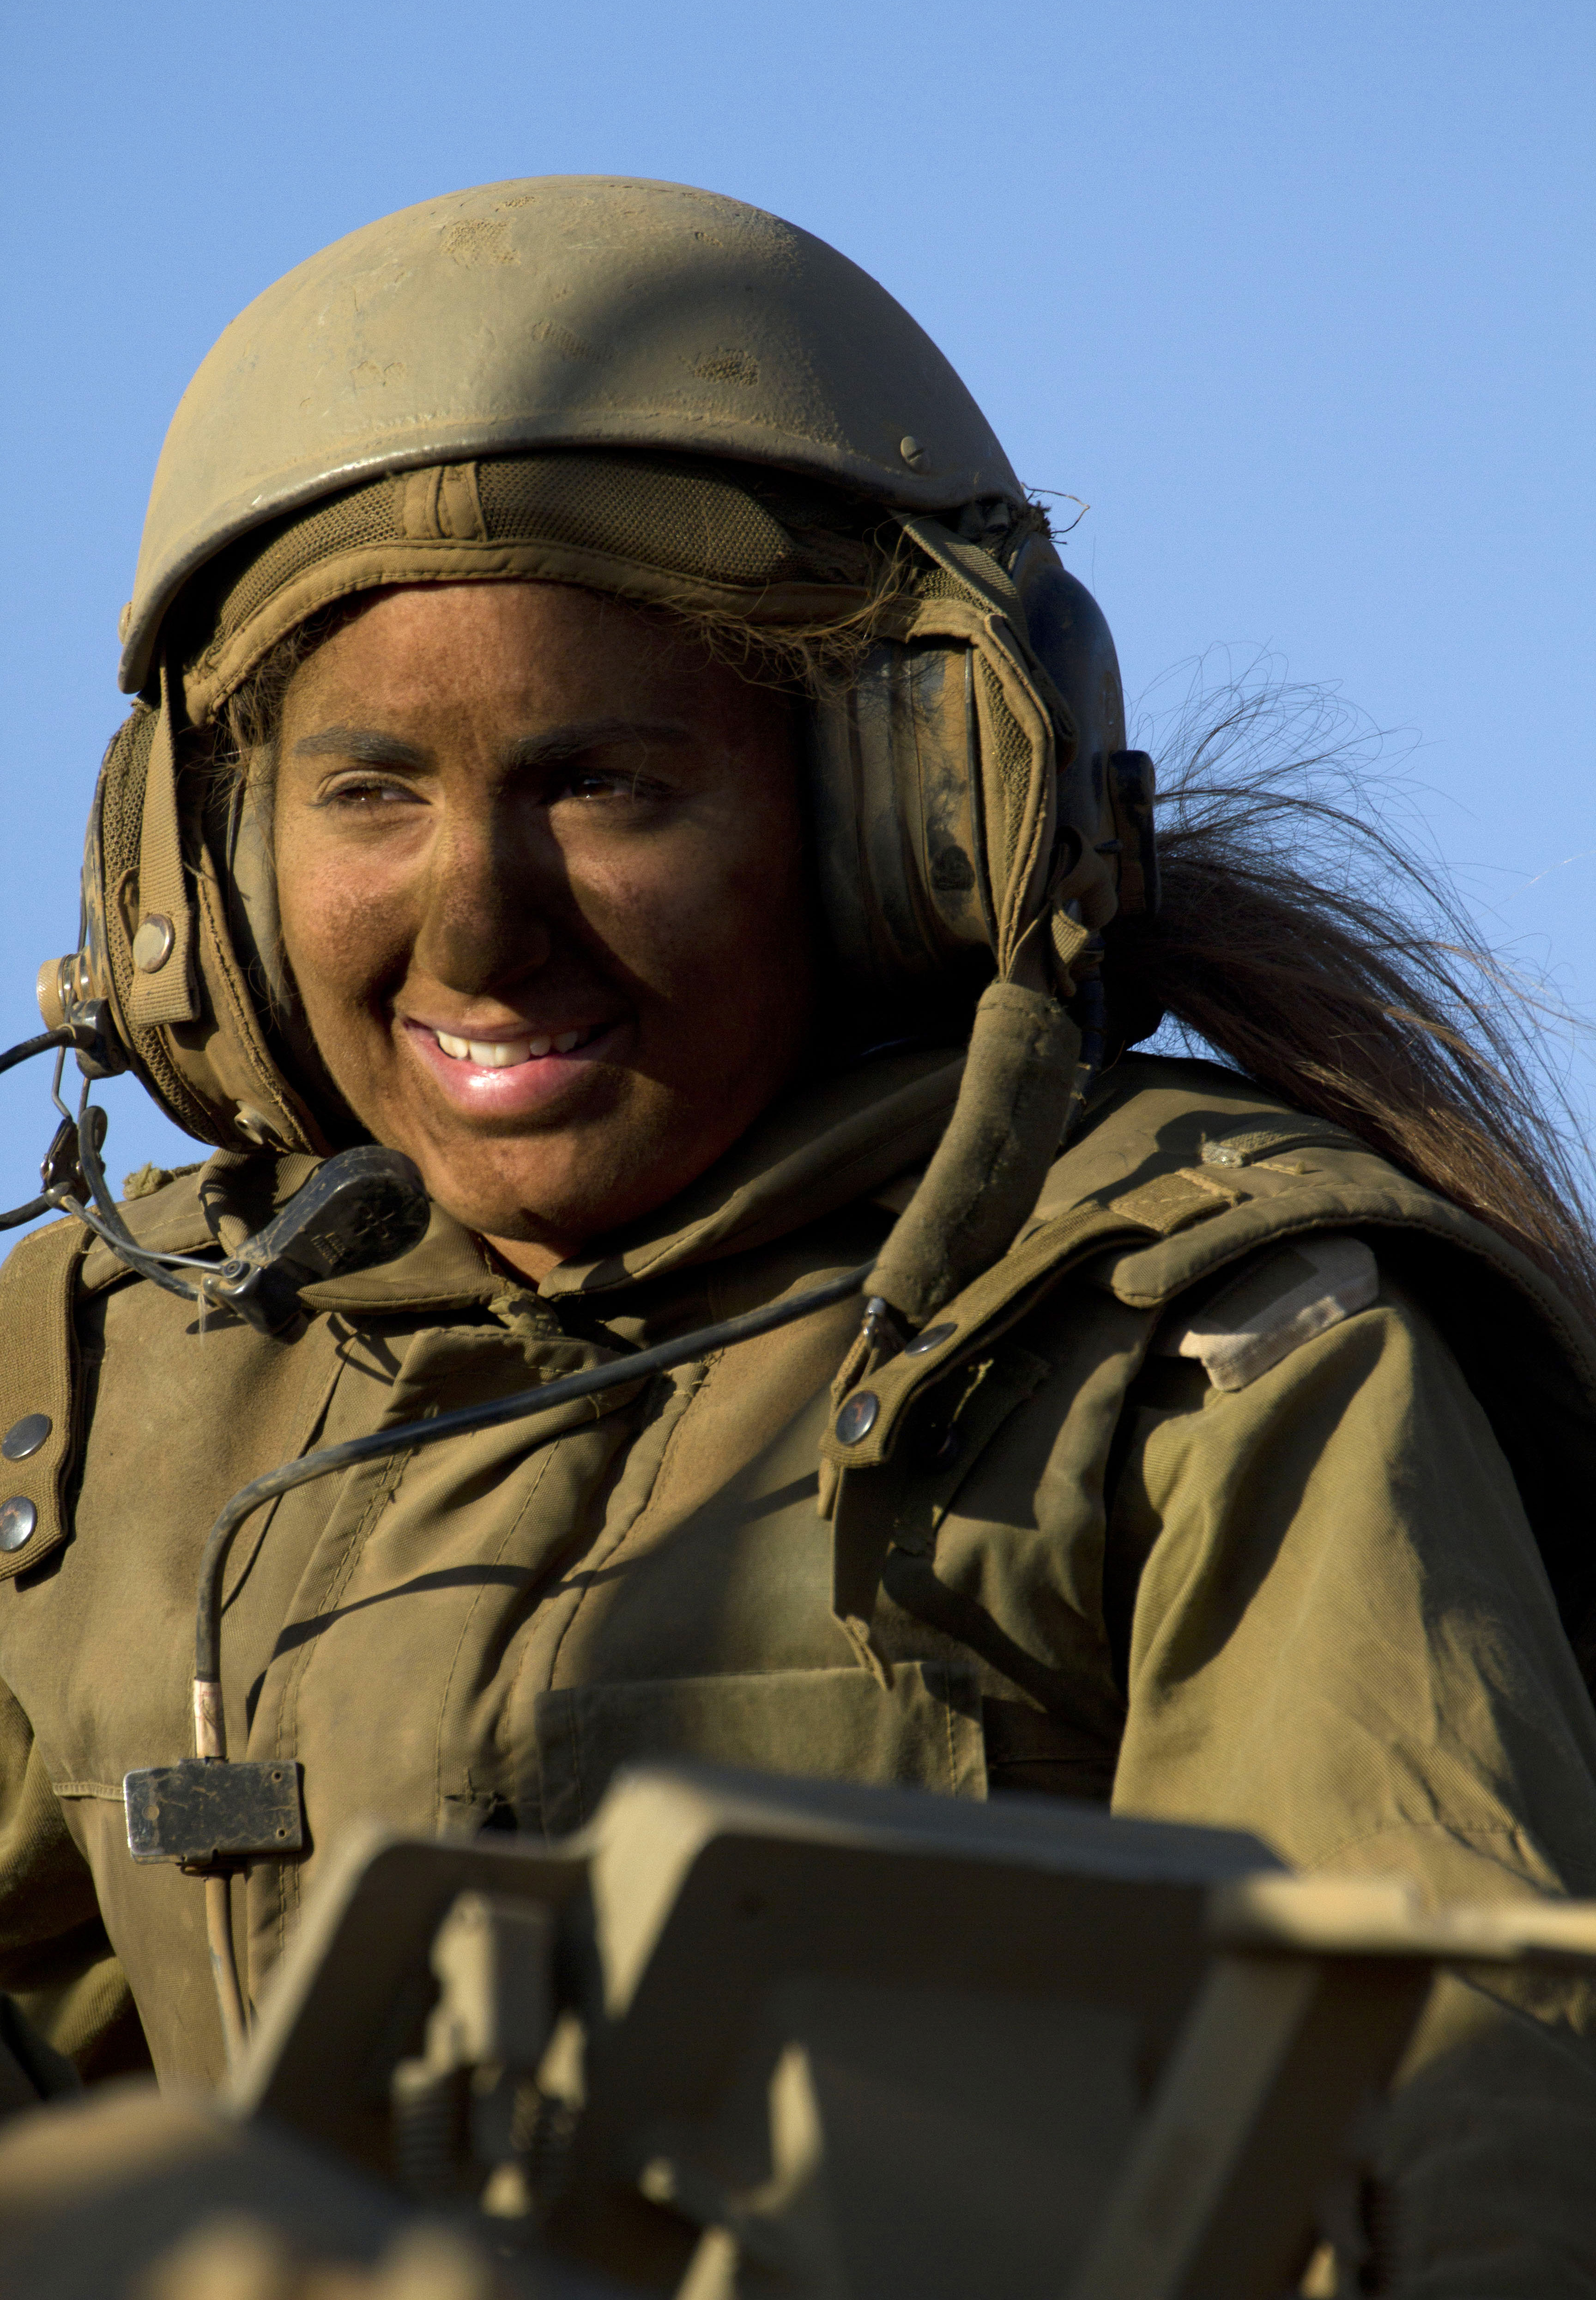 A look at countries where women are in combat - The Daily Universe